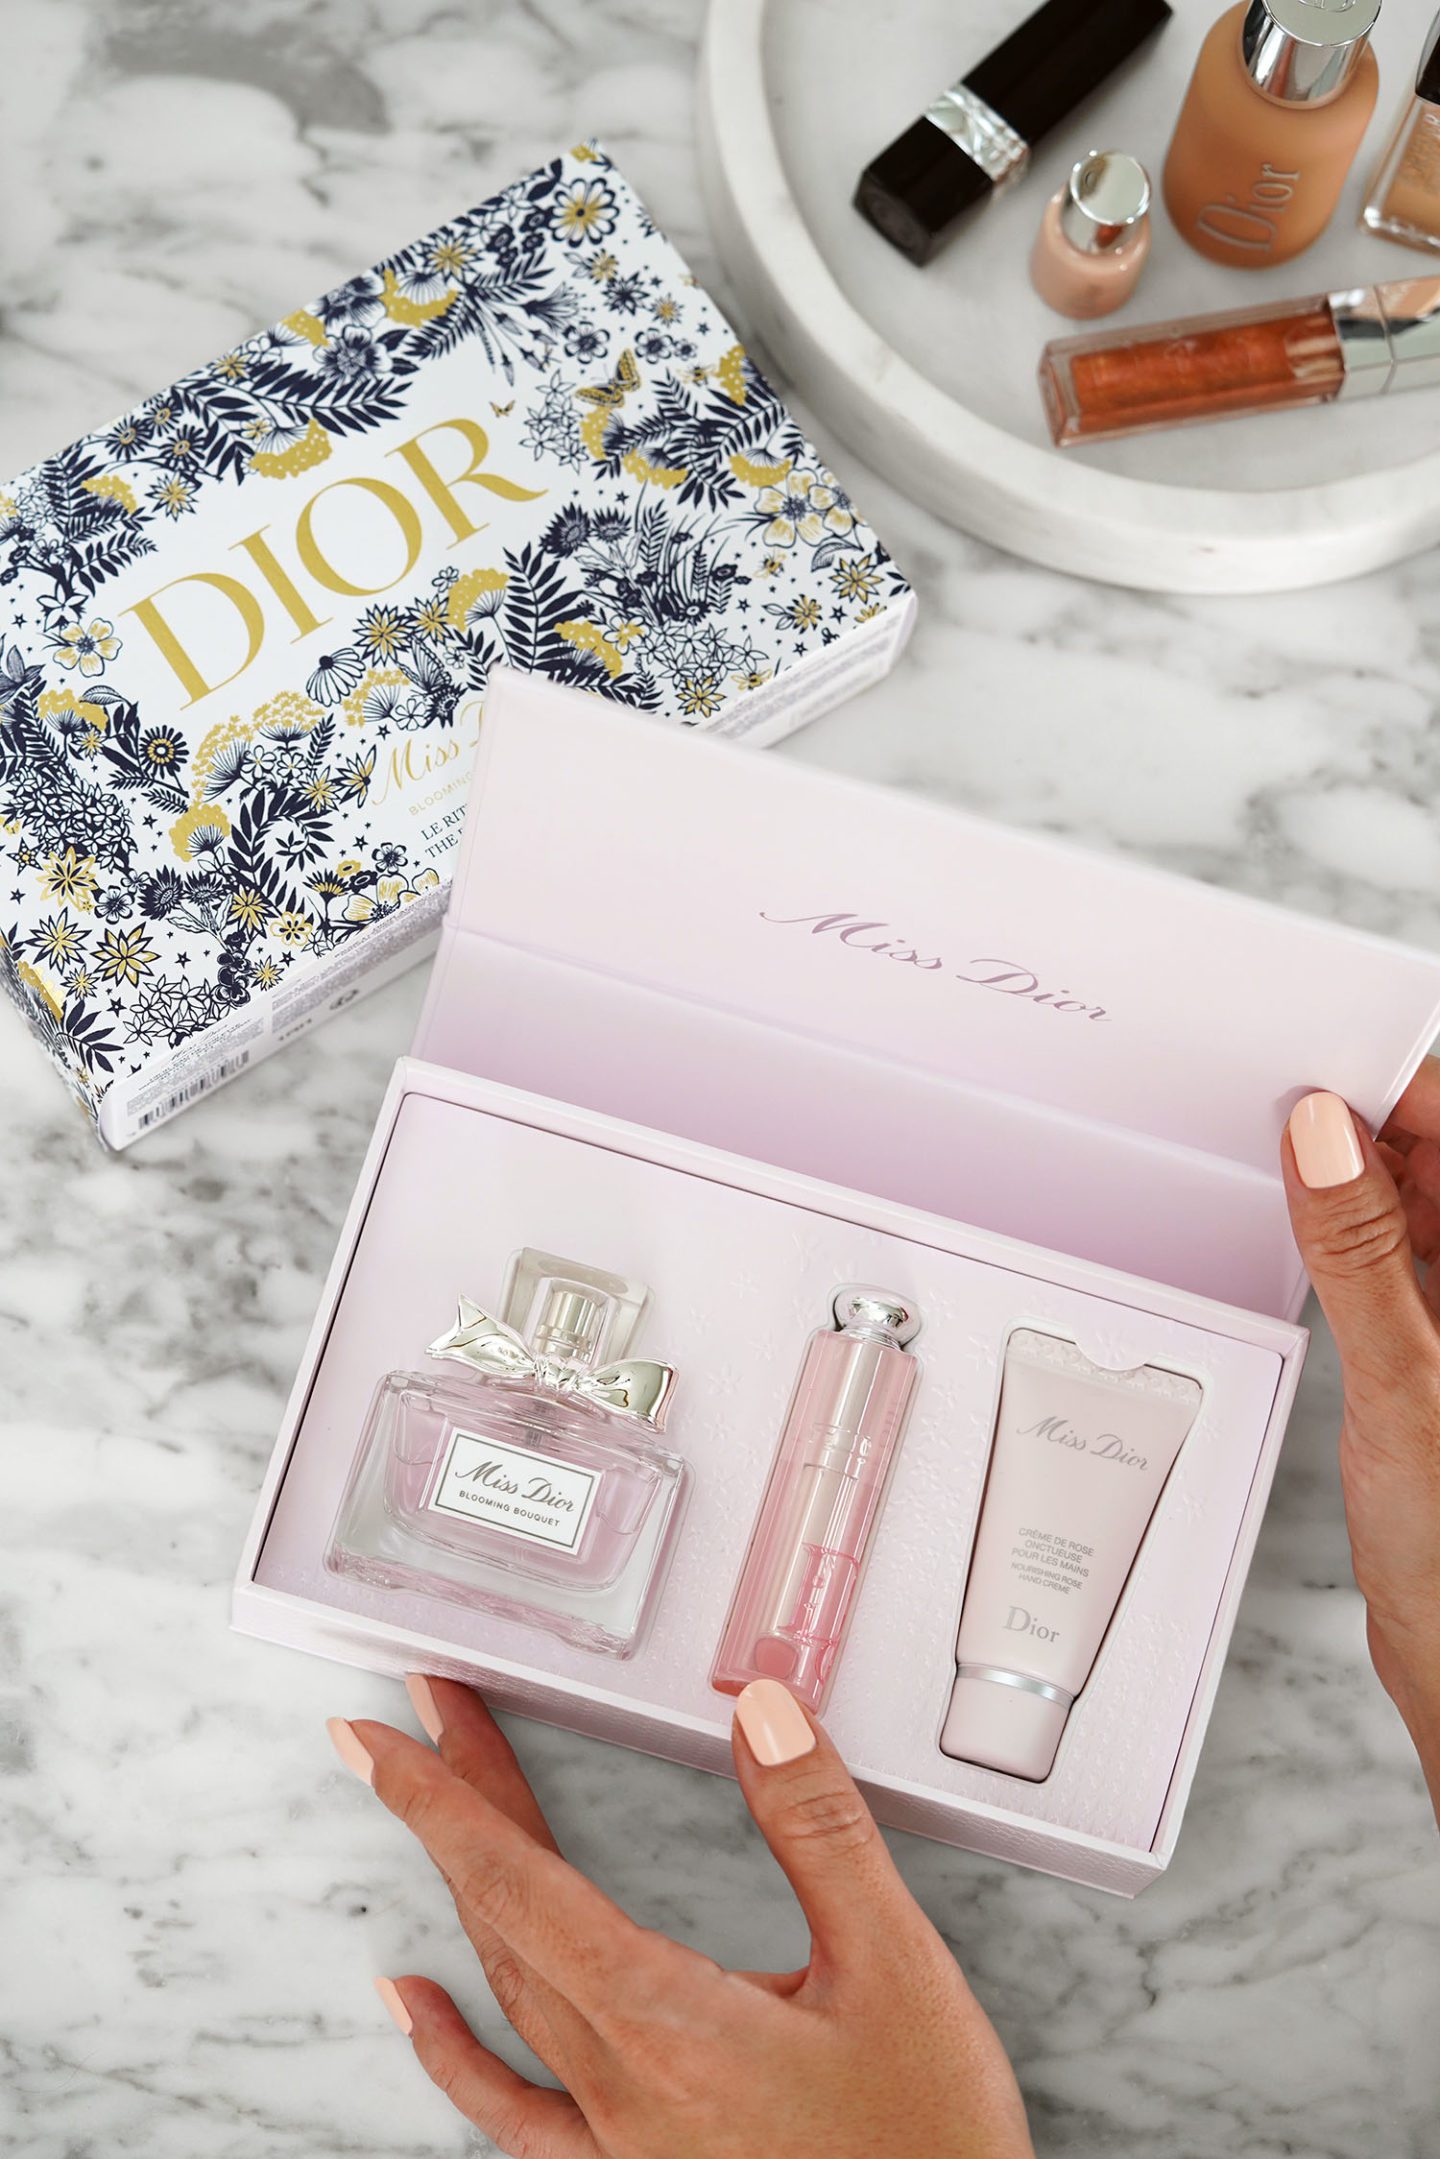 Miss Dior Blooming Bouquet and Lip Glow Gift Set